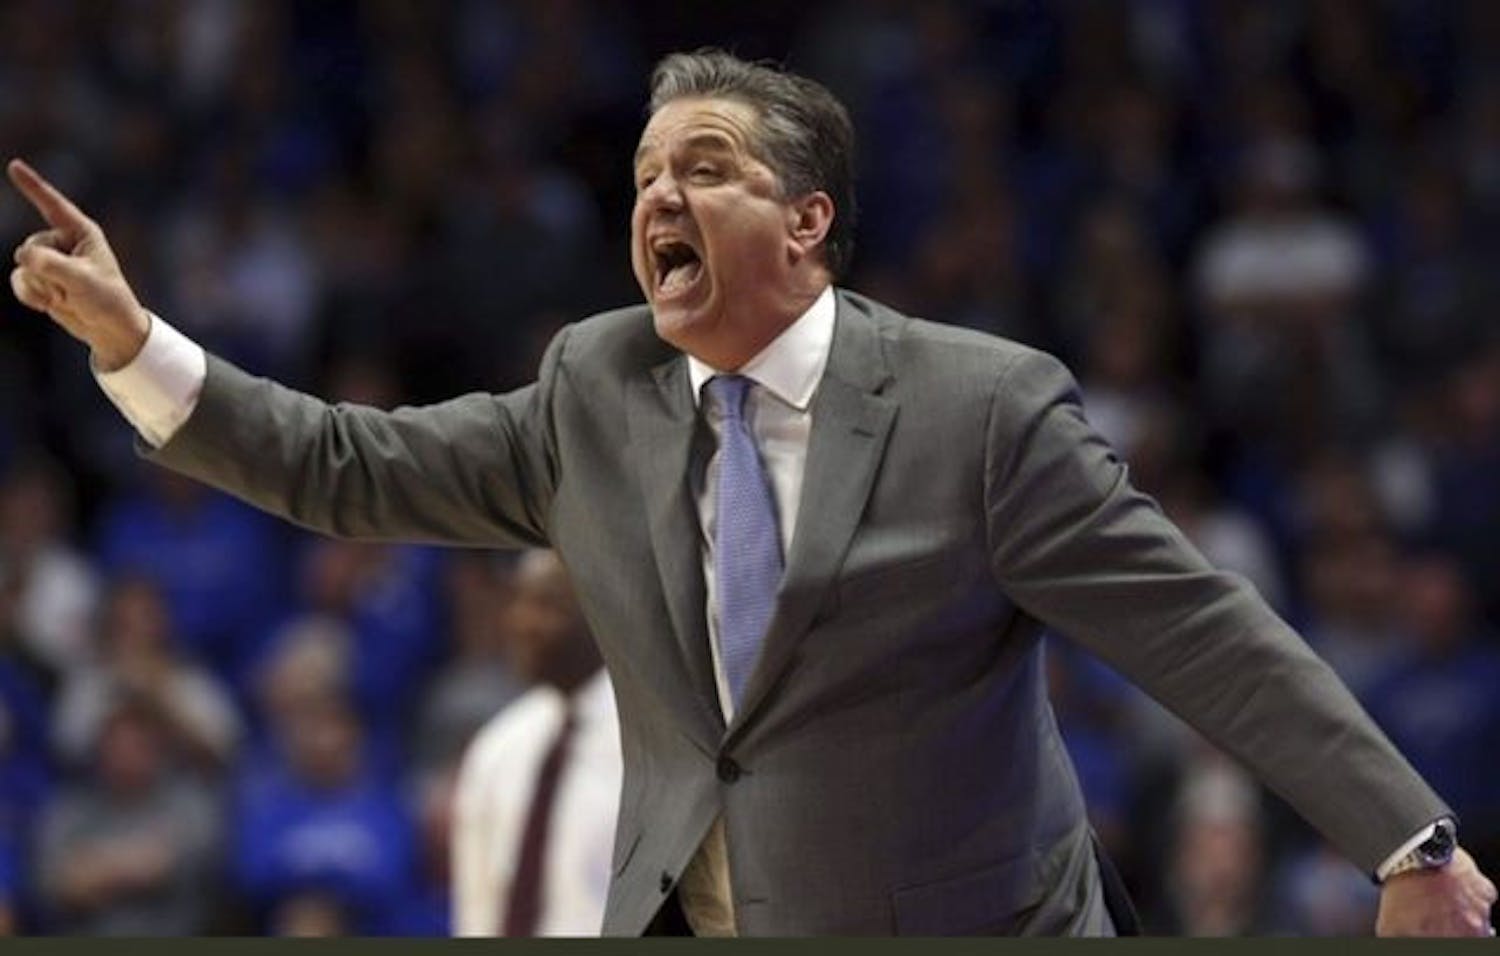 Kentucky coach John Calipari and the Wildcats enter the SEC Tournament as the No. 2-seed, where they will play the winner of Ole Miss and Alabama on Friday.
&nbsp;